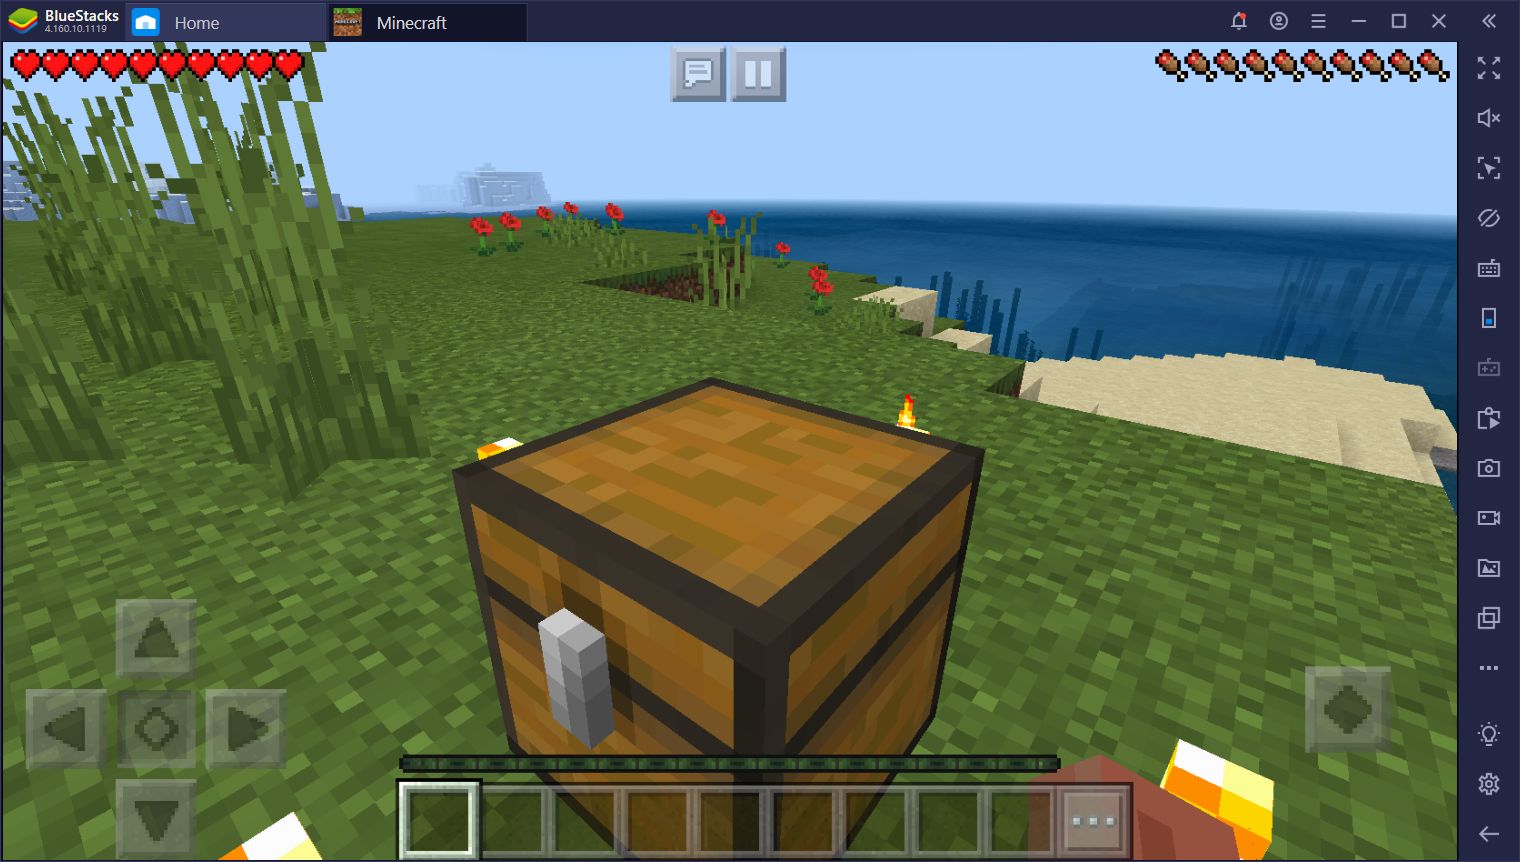 Minecraft on PC is Now Available on BlueStacks